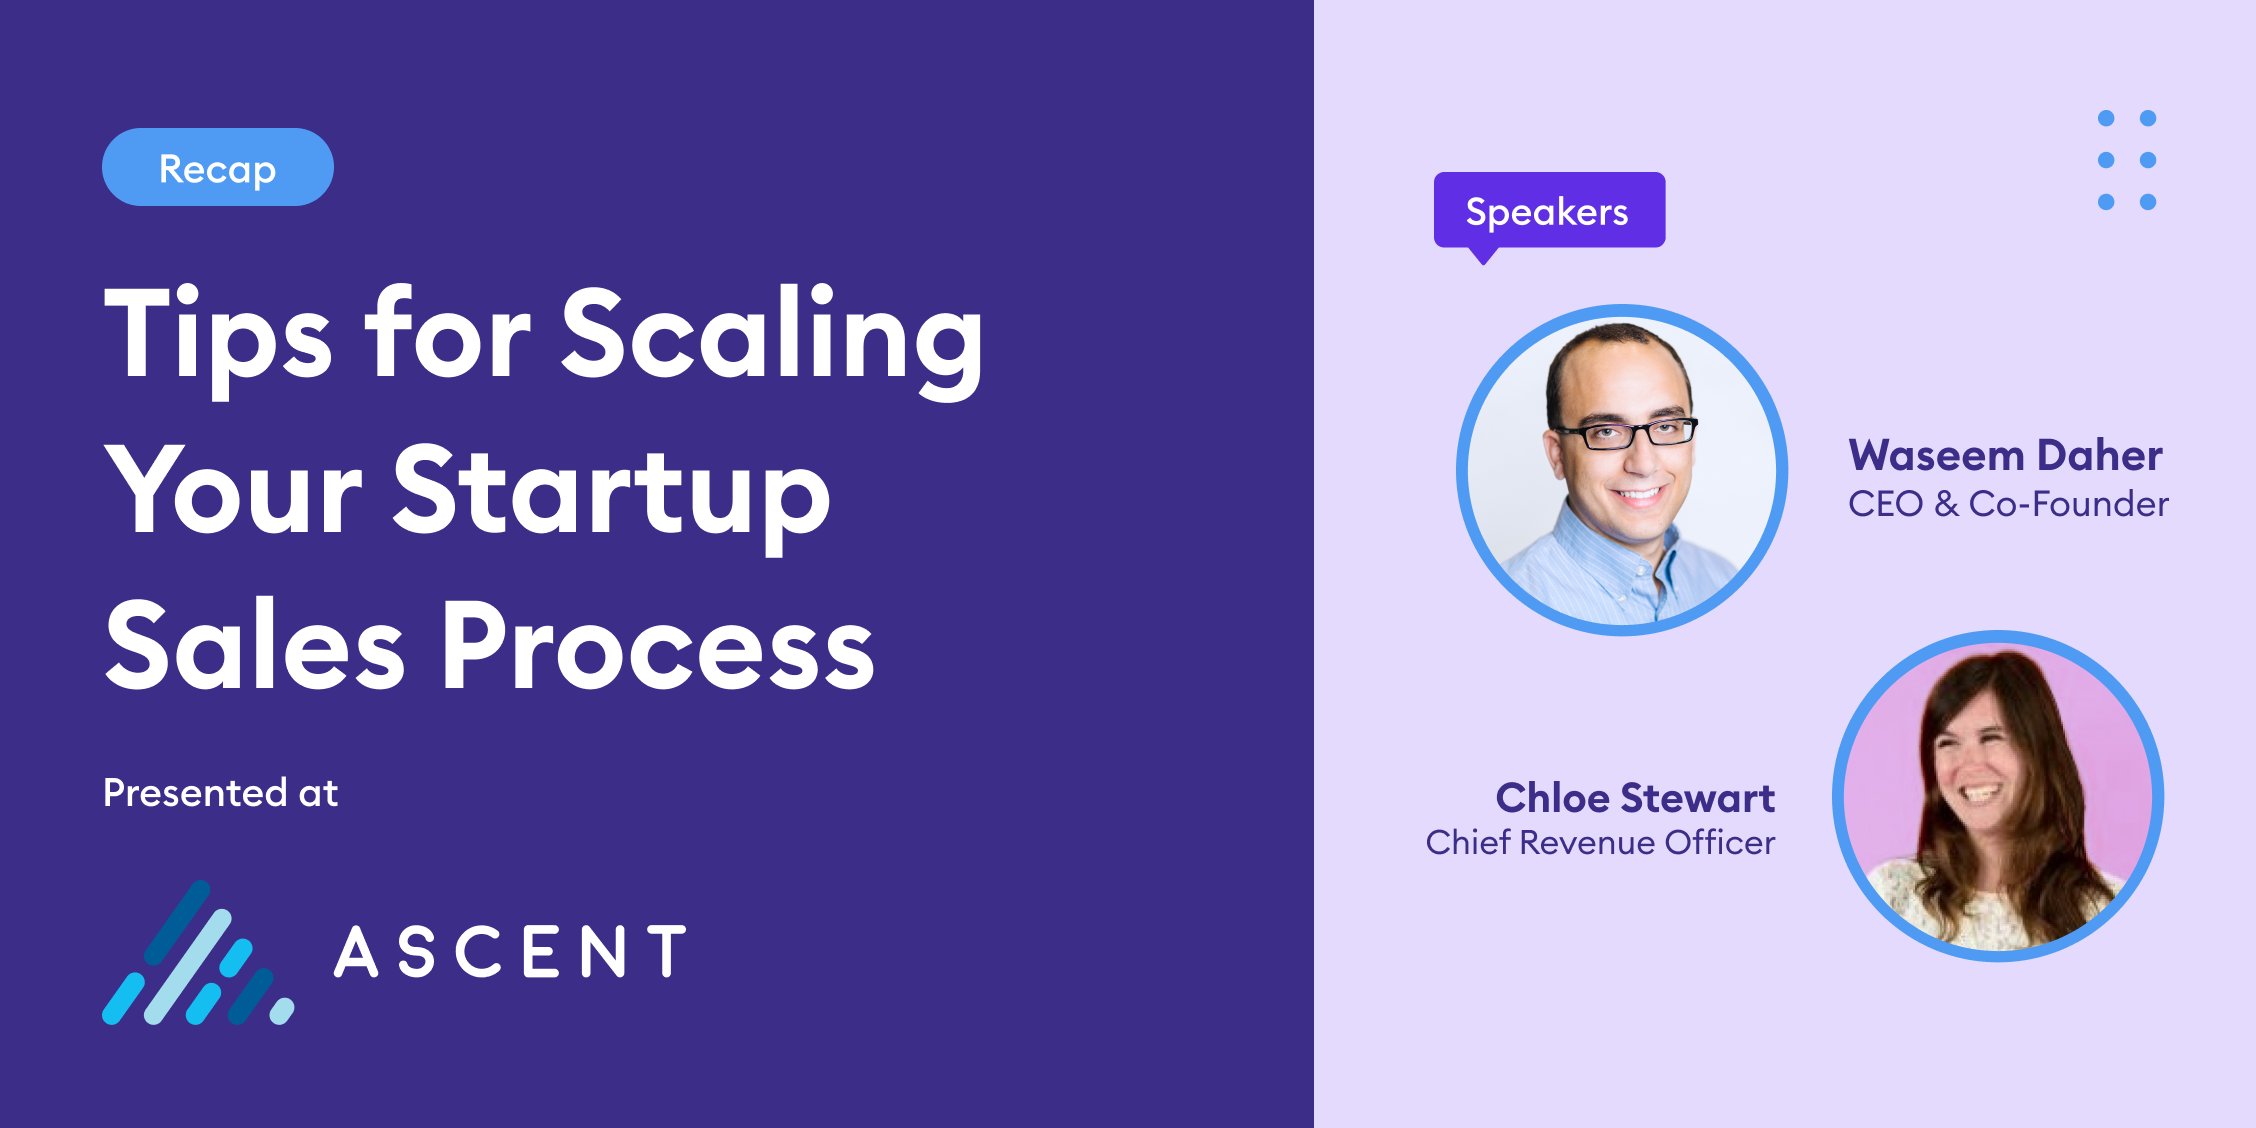 Tips for Scaling Your Startup Sales Process